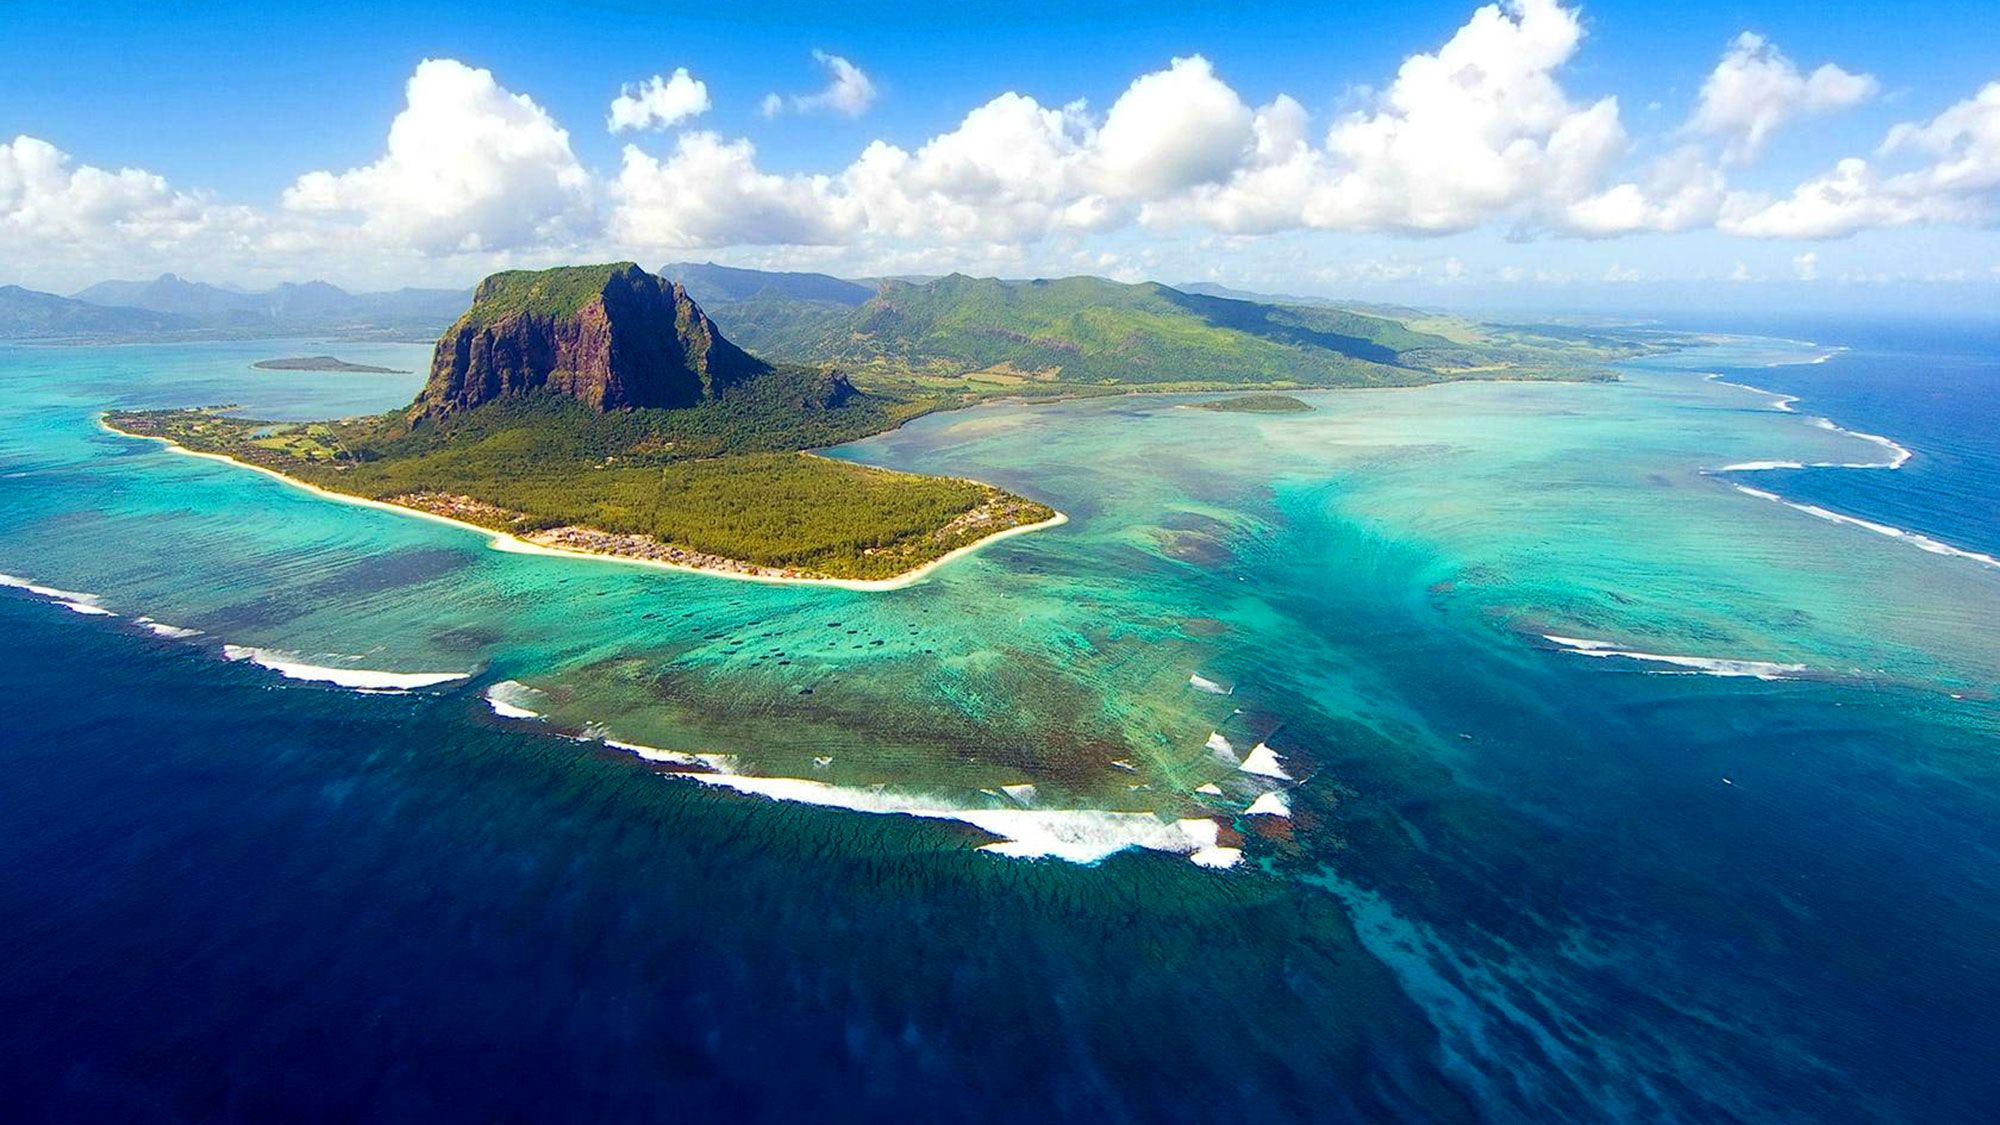 Scientists Found a 'Lost' Continent in the Indian Ocean